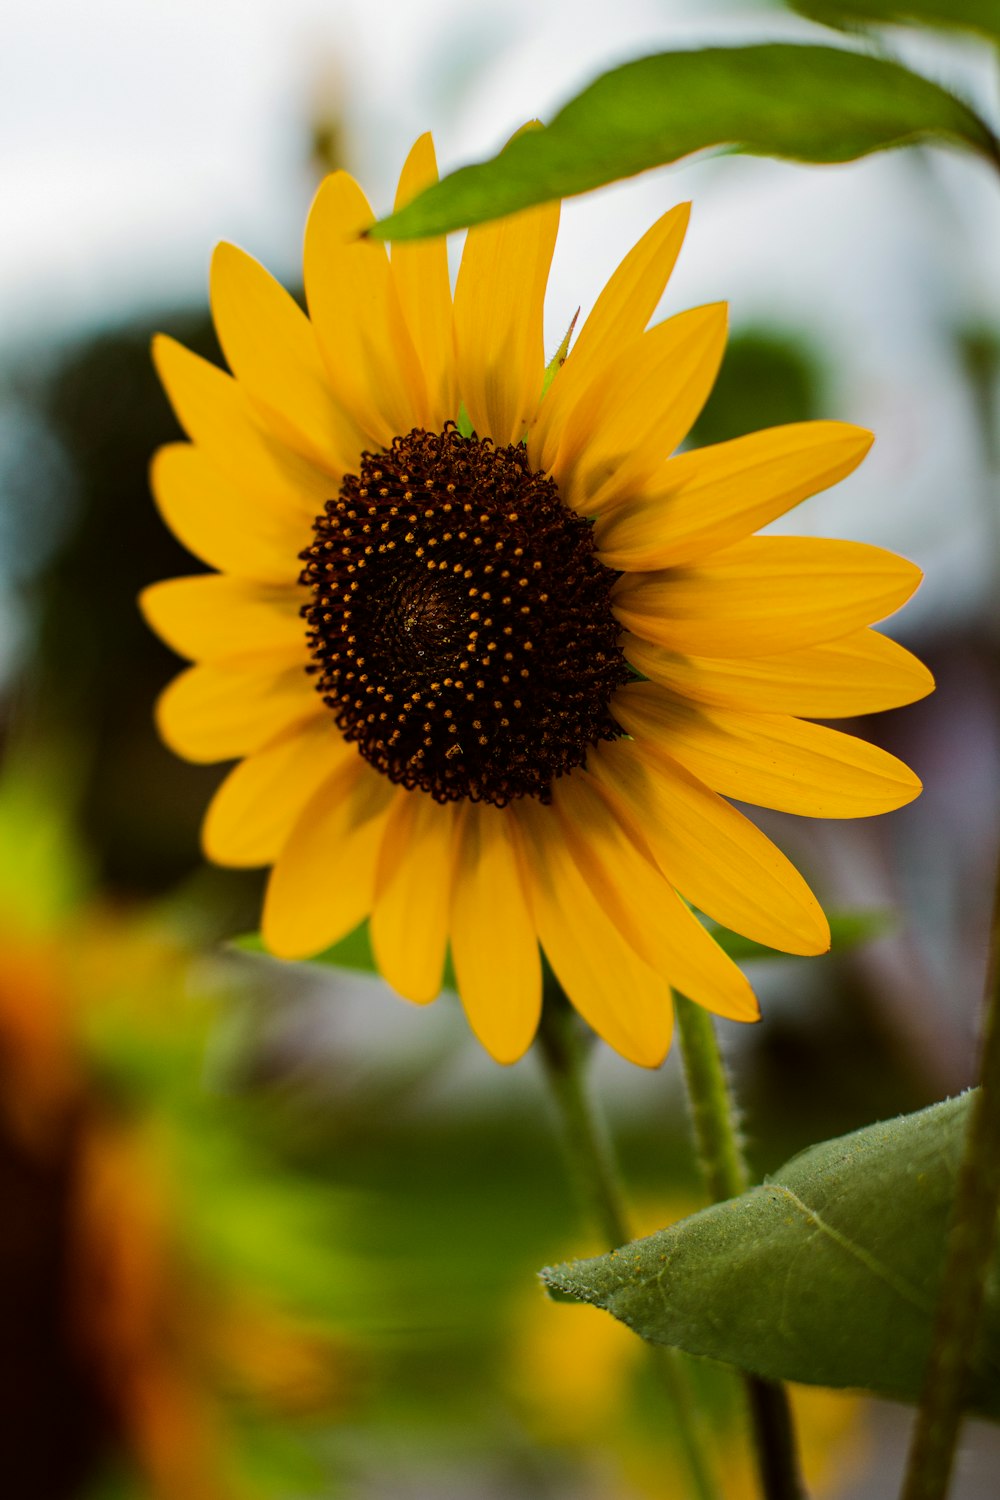 a yellow sunflower with a large center